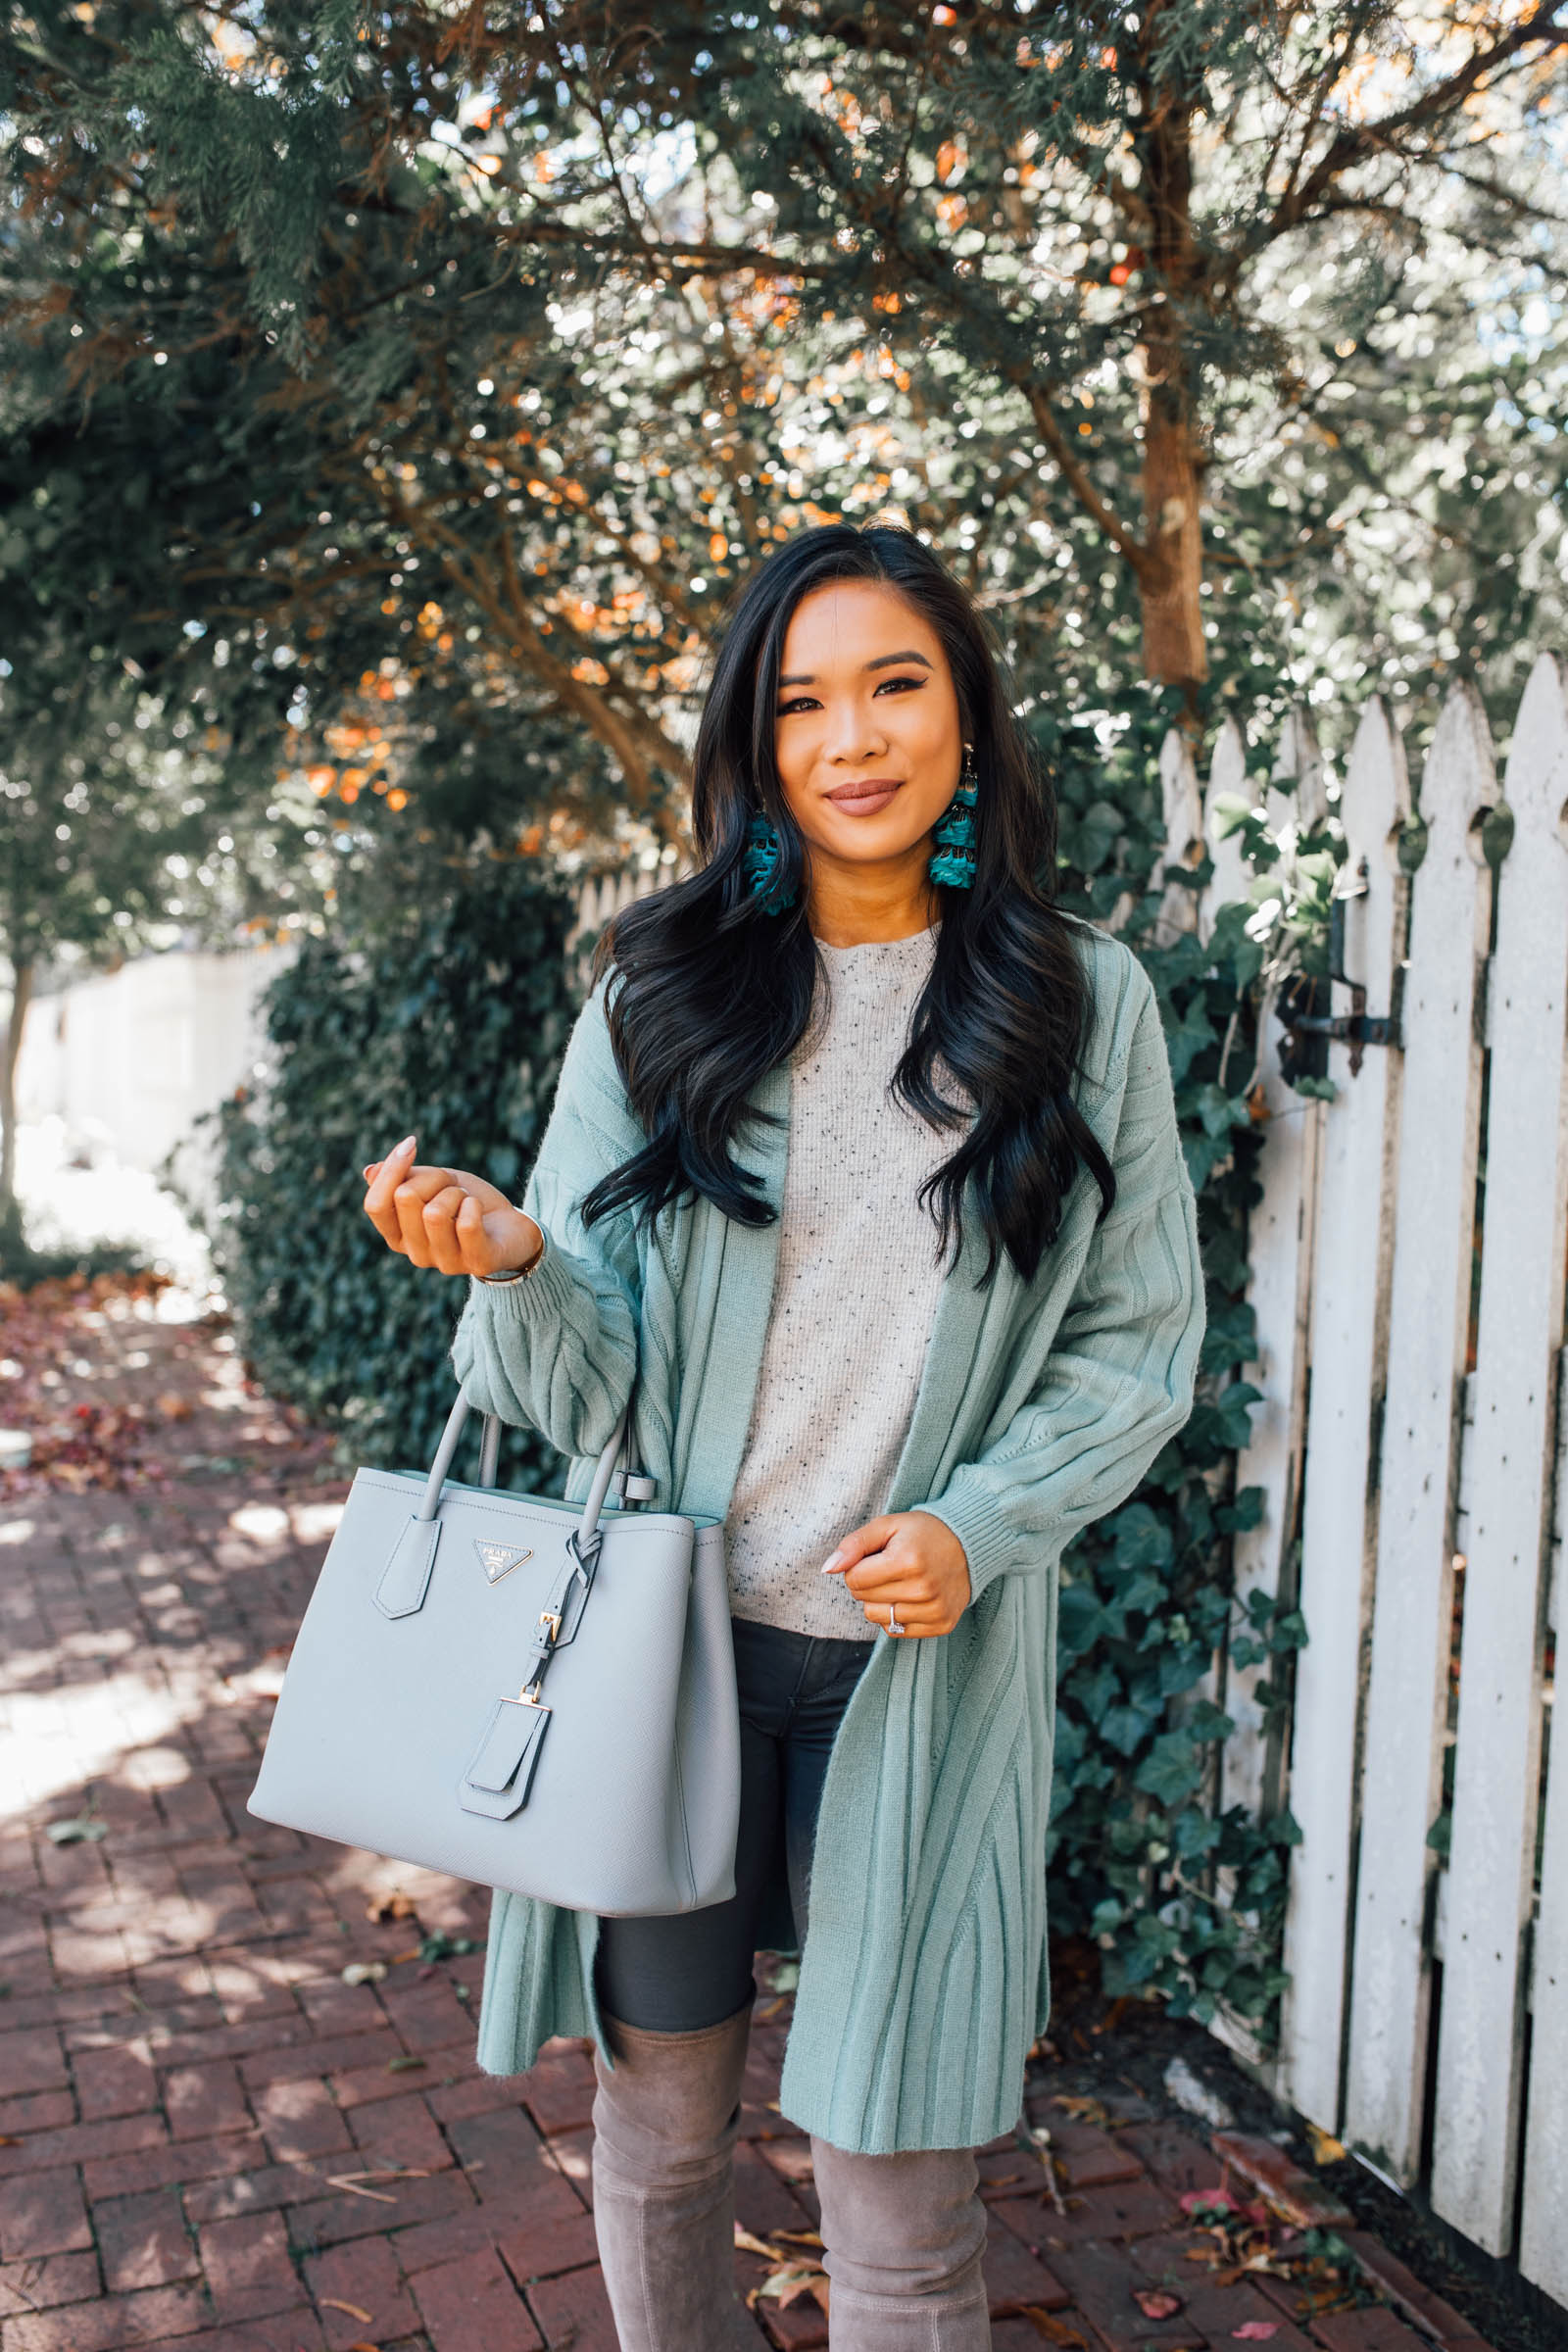 Blogger Hoang-Kim shares how to style a mint green cardigan for a fall ootd